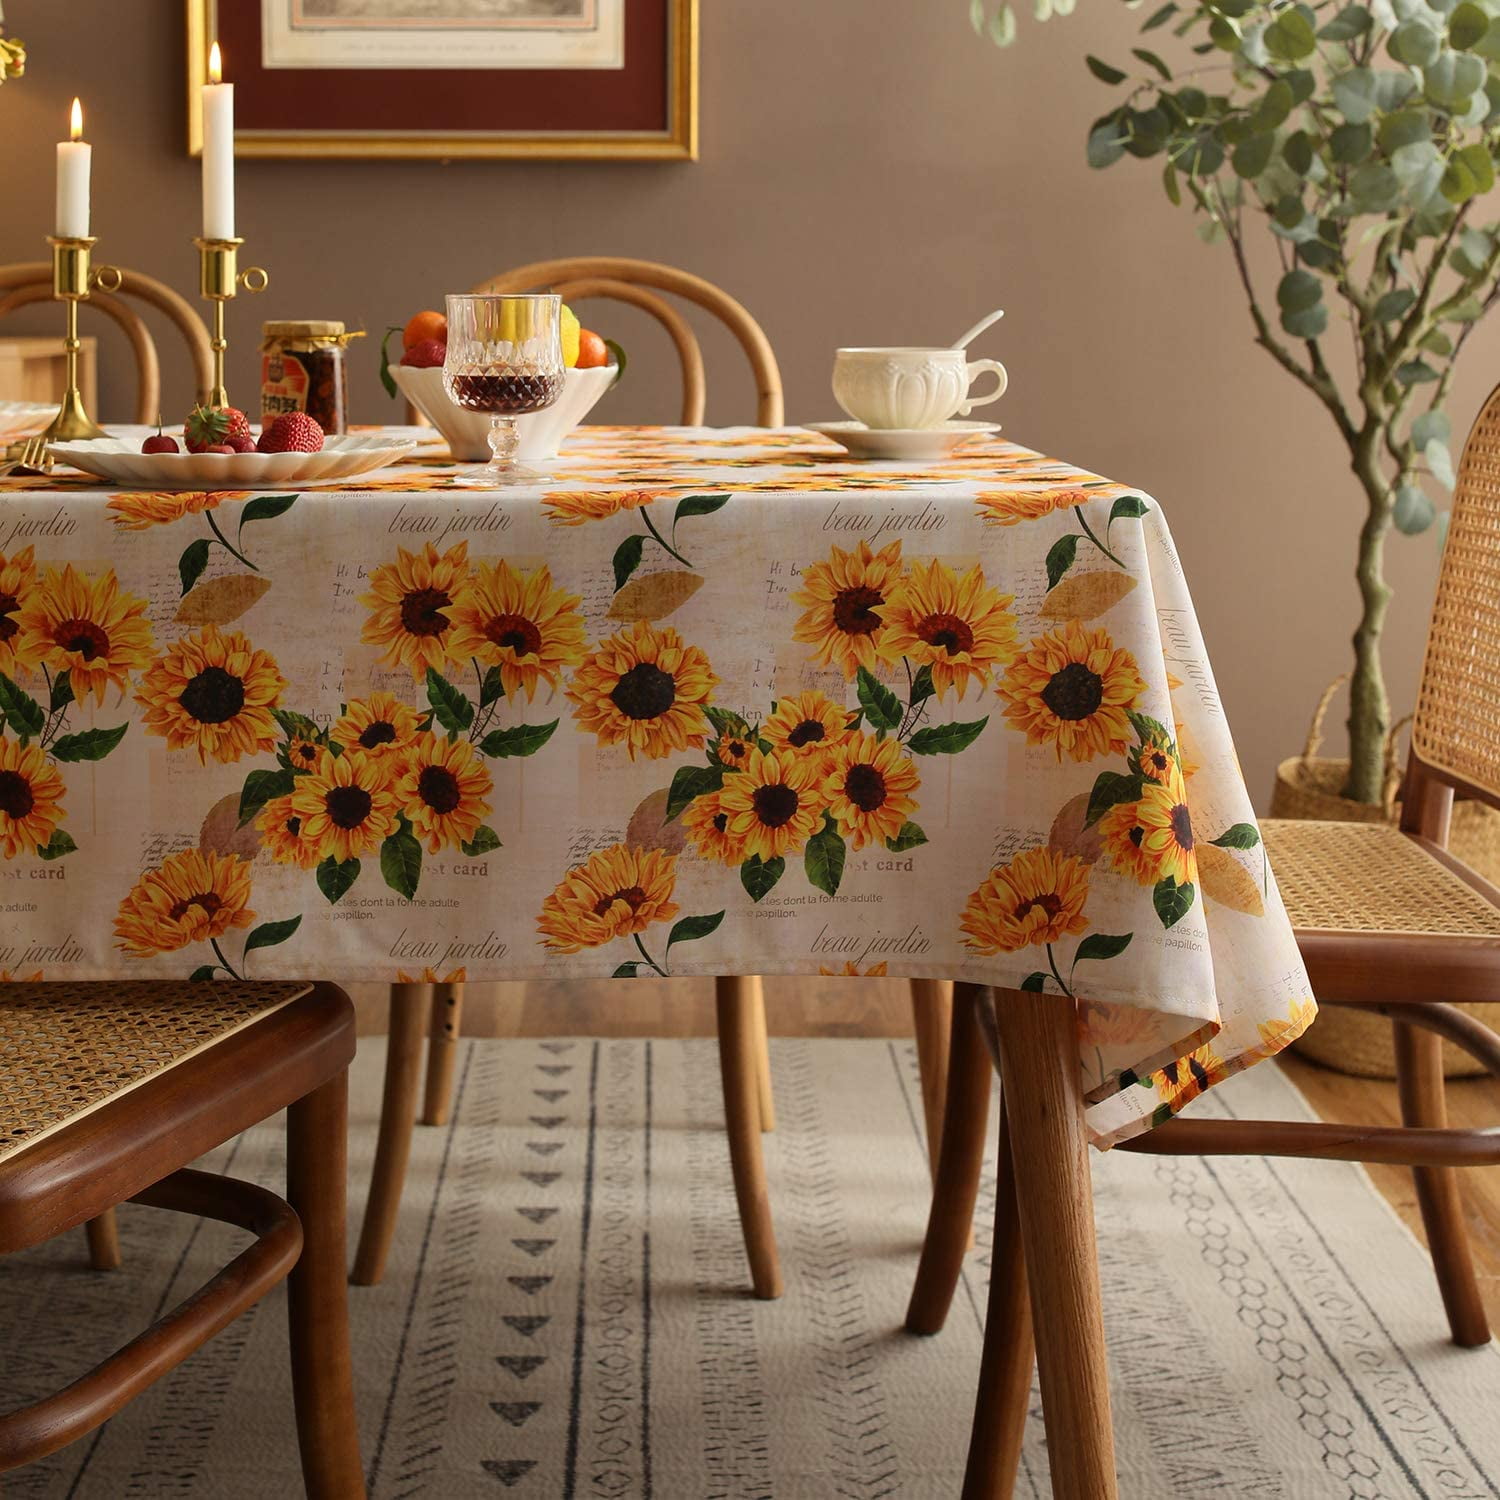 Rectangle Tablecloth Cactus and Yellow Flower Table Cloth Picnic Table Cover Vinyl Fabric Holiday Tablecloths for Kitchen Outdoor Camping Desk Cover Party Decor 54 x 54 Inch